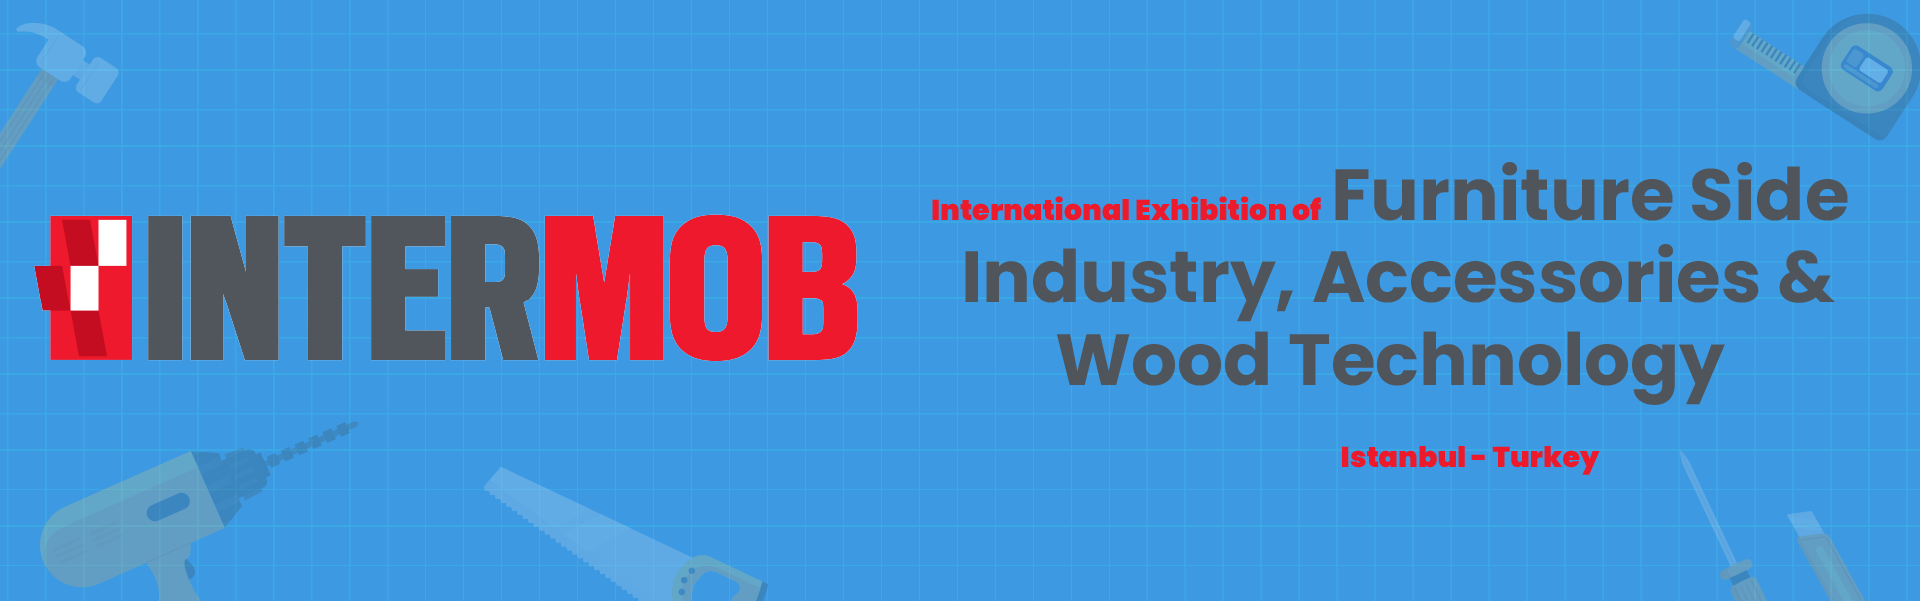 Furniture side industry Accessories and wood technology Exhibition Istanbul Turkey